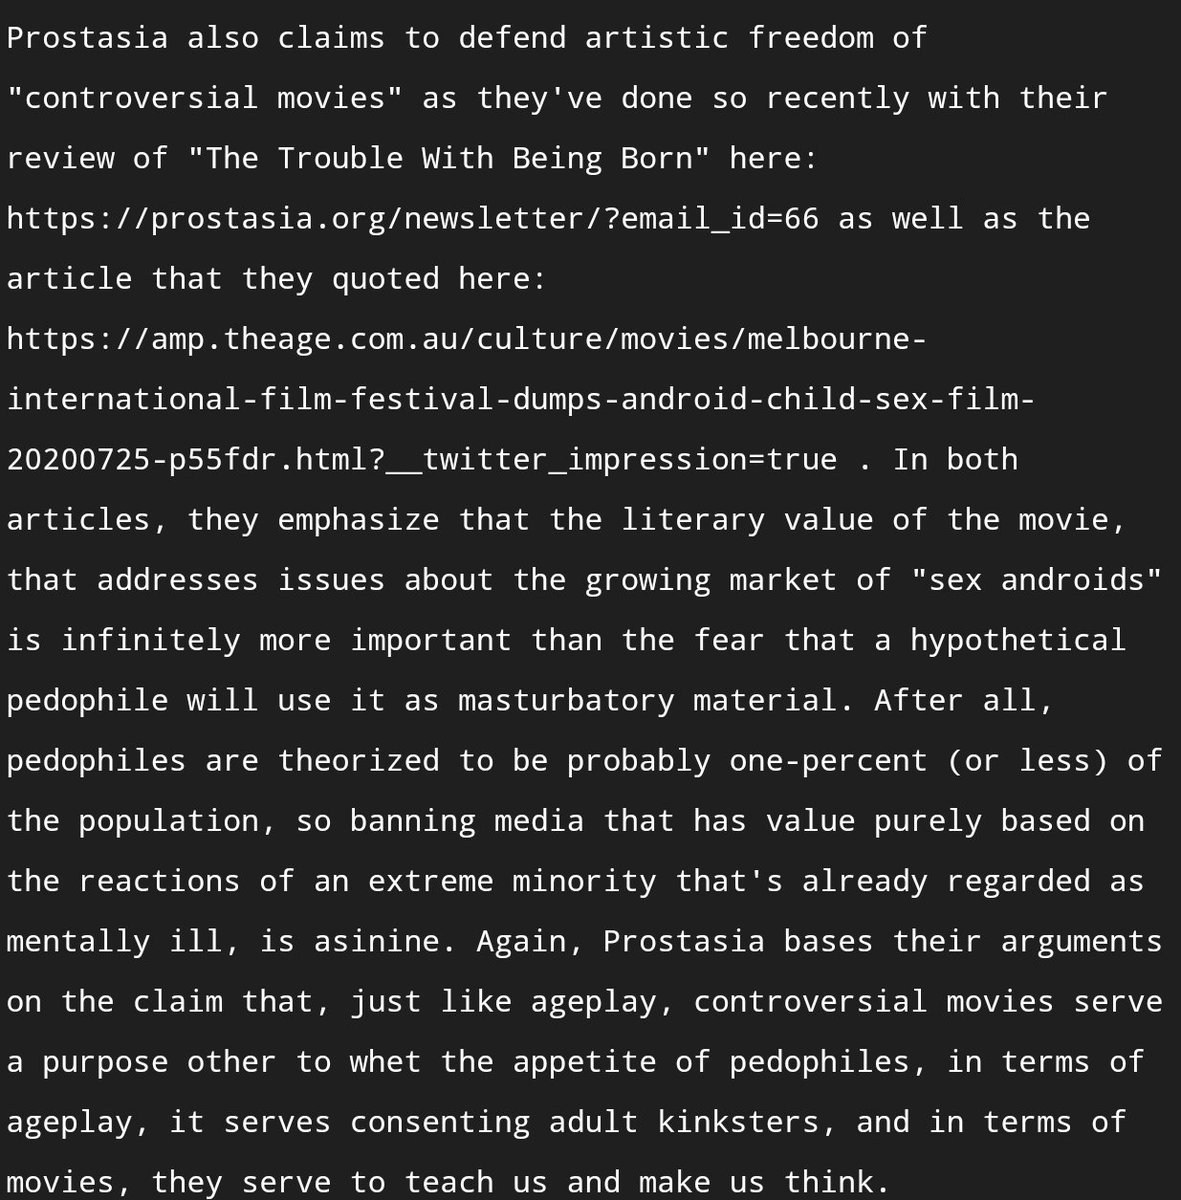 3. "Artistic freedom"Prostasia also wrote about how controversial movies that deal with themes of pedophilia or CSA are worth protecting, because just like ageplay, they serve a separate audience. The literary value of a movie far outweighs any hypothetical pedophile